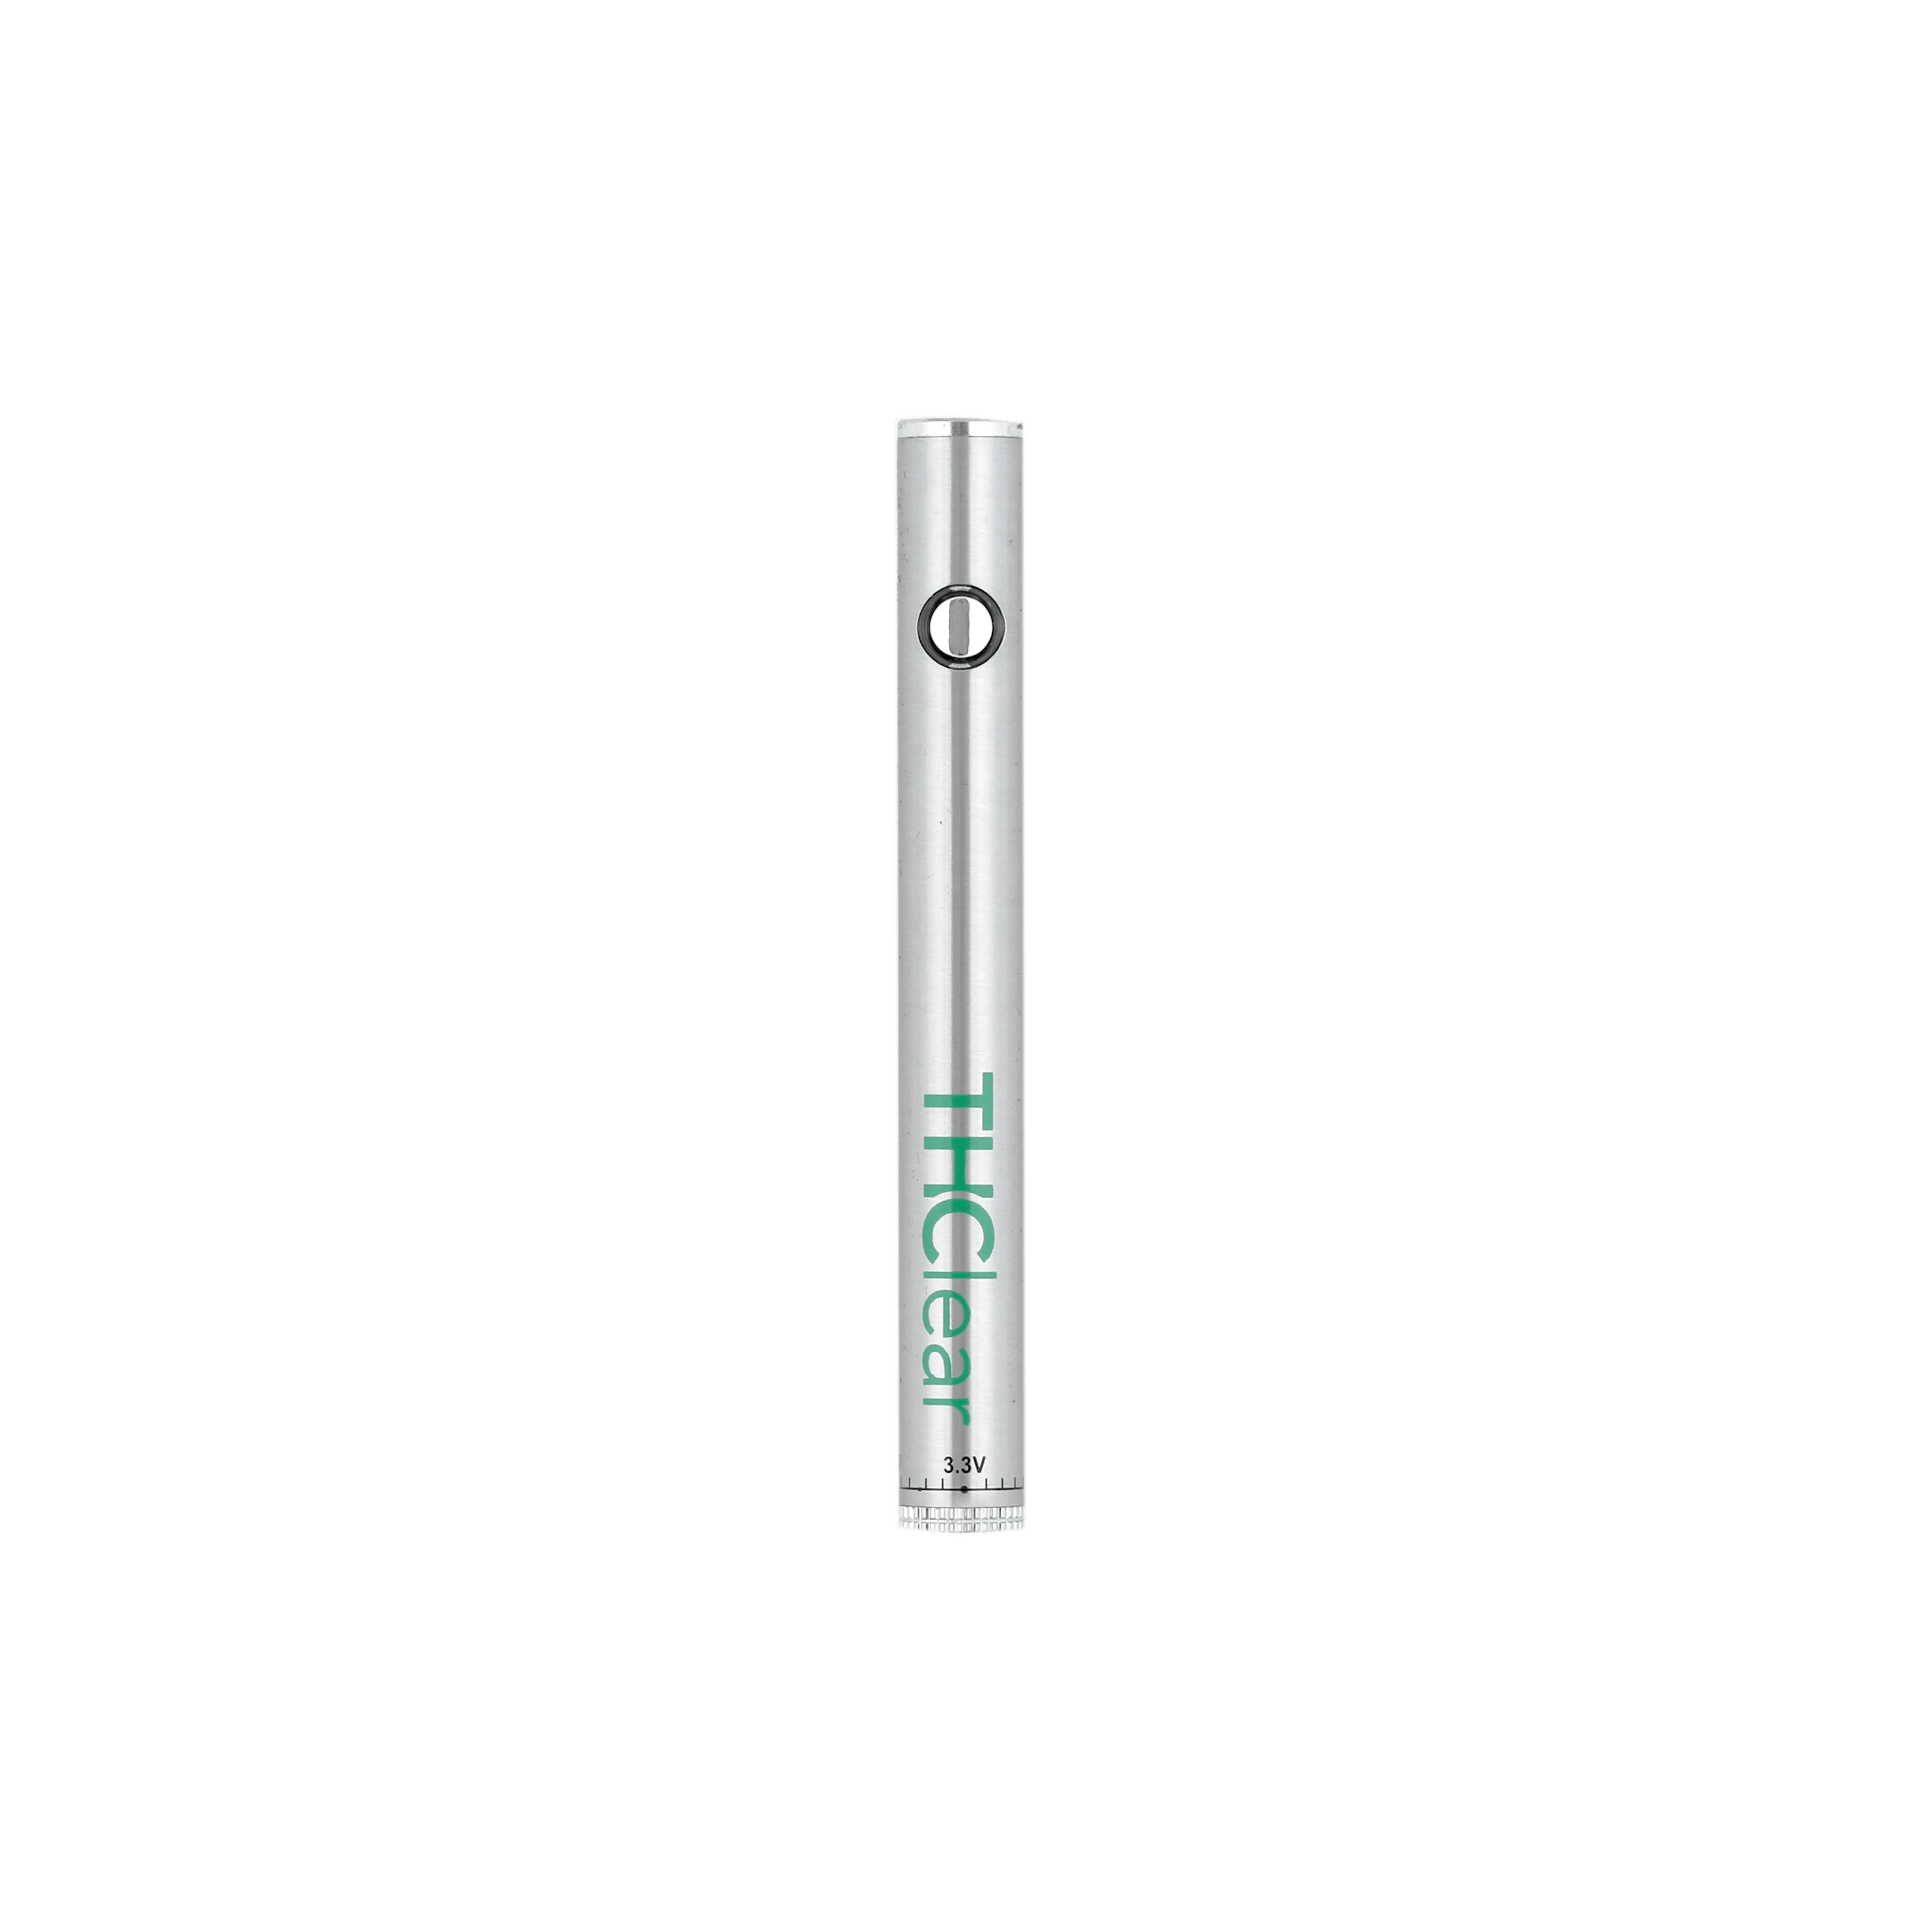 marijuana-dispensaries-mr-steal-your-patients-2419-cap-in-whittier-battery-kit-variable-voltage-silver